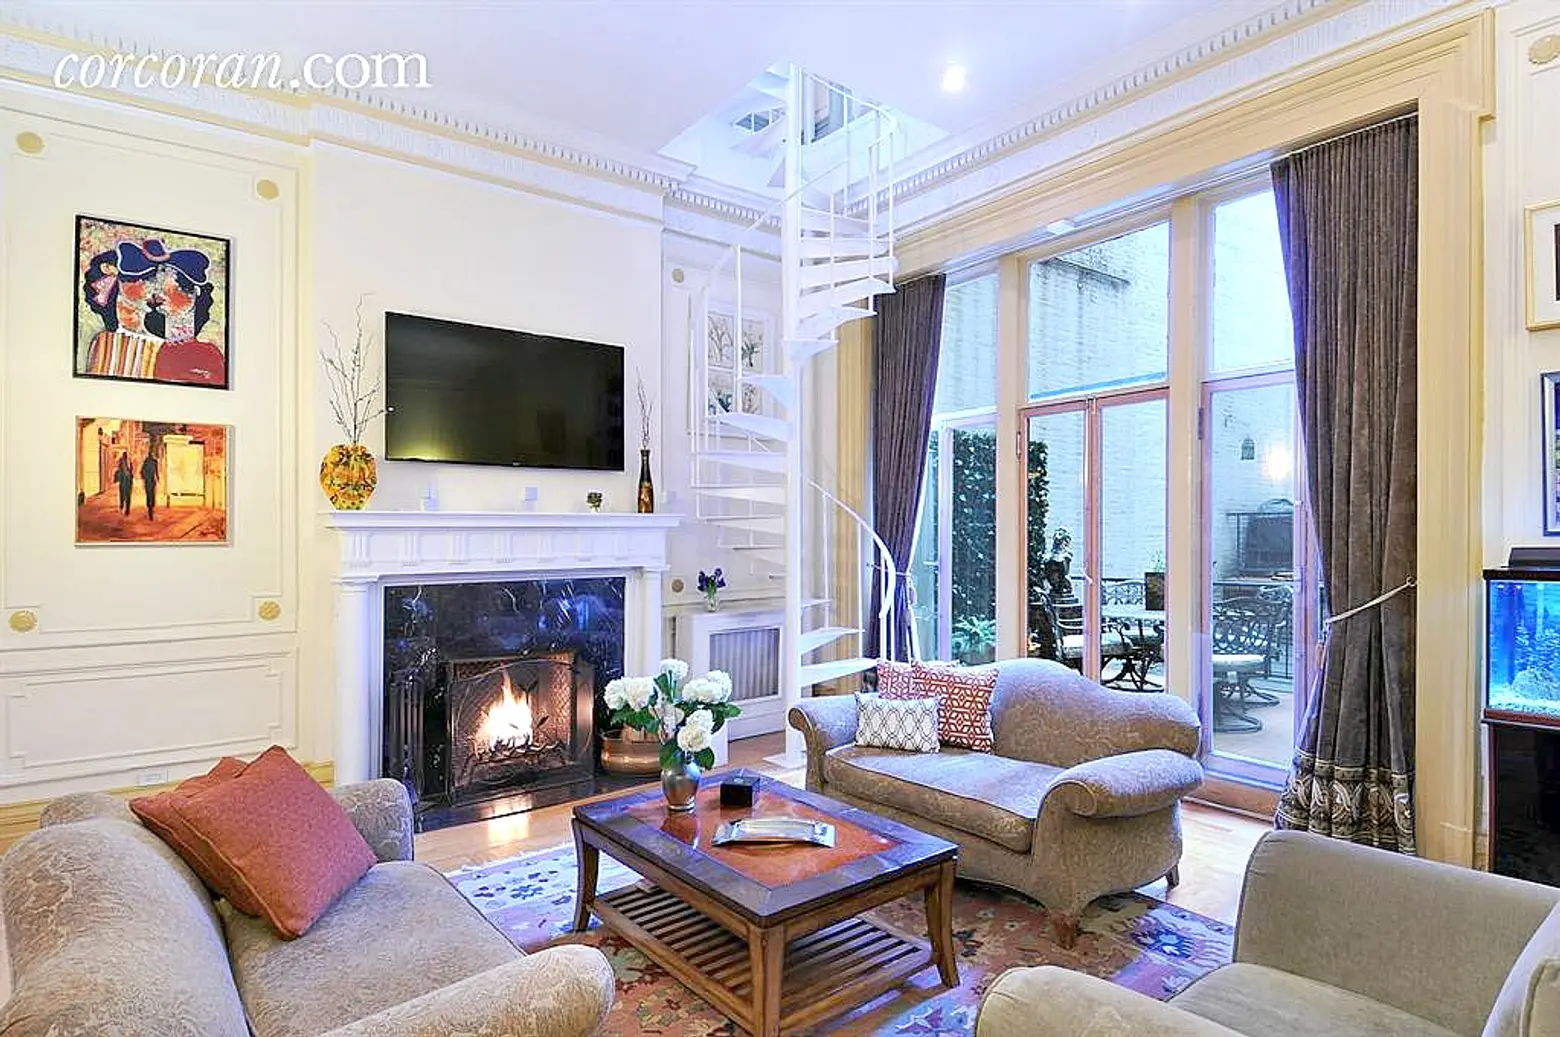 With Terraces, Fireplaces and a Hidden Bar, This $2.5M Murray Hill Duplex Is Classic Manhattan